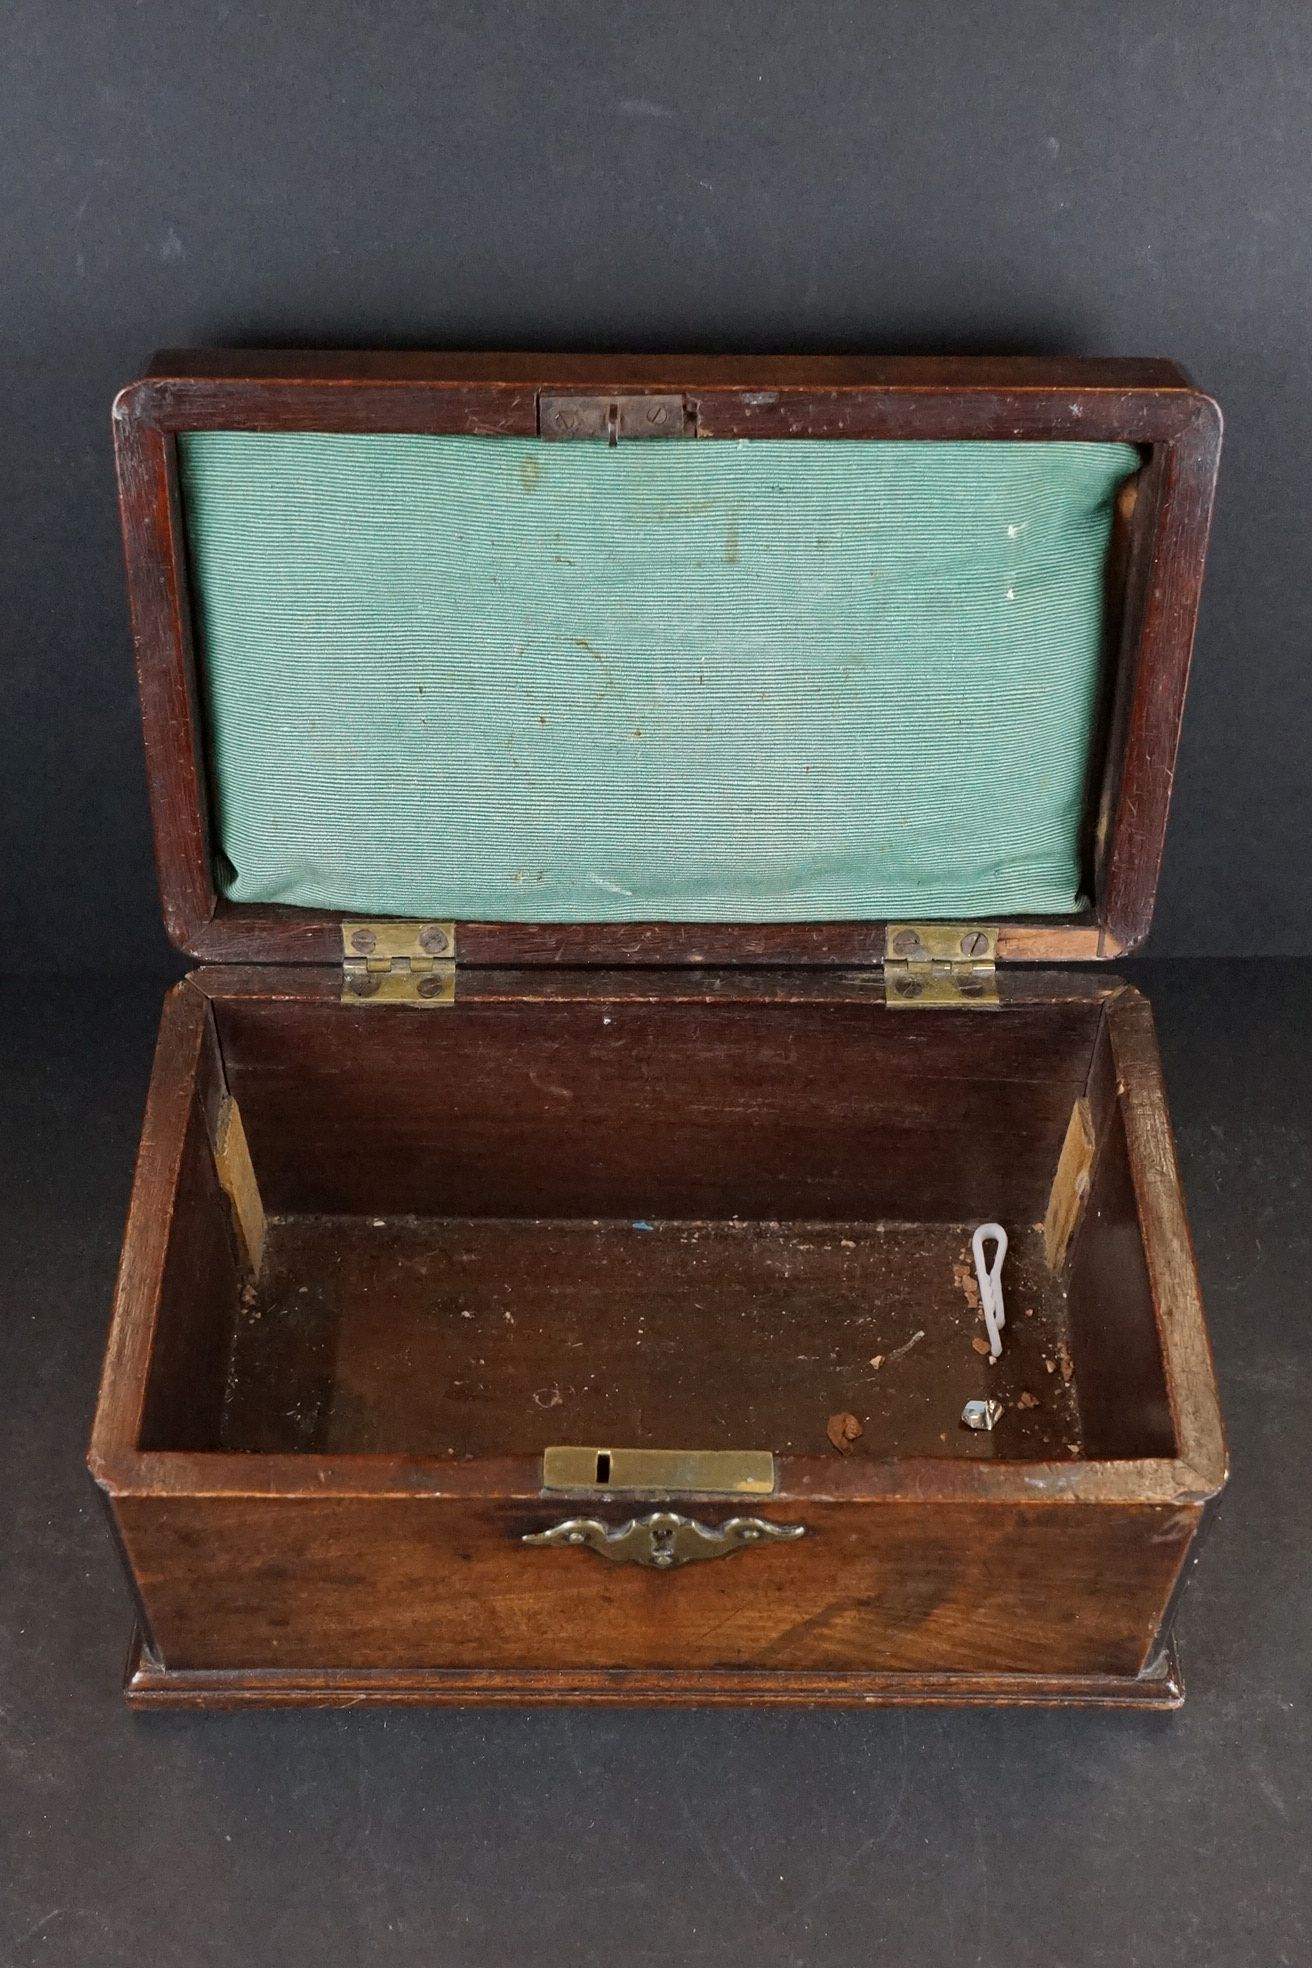 An antique wooden lidded box with brass fittings - Image 5 of 7